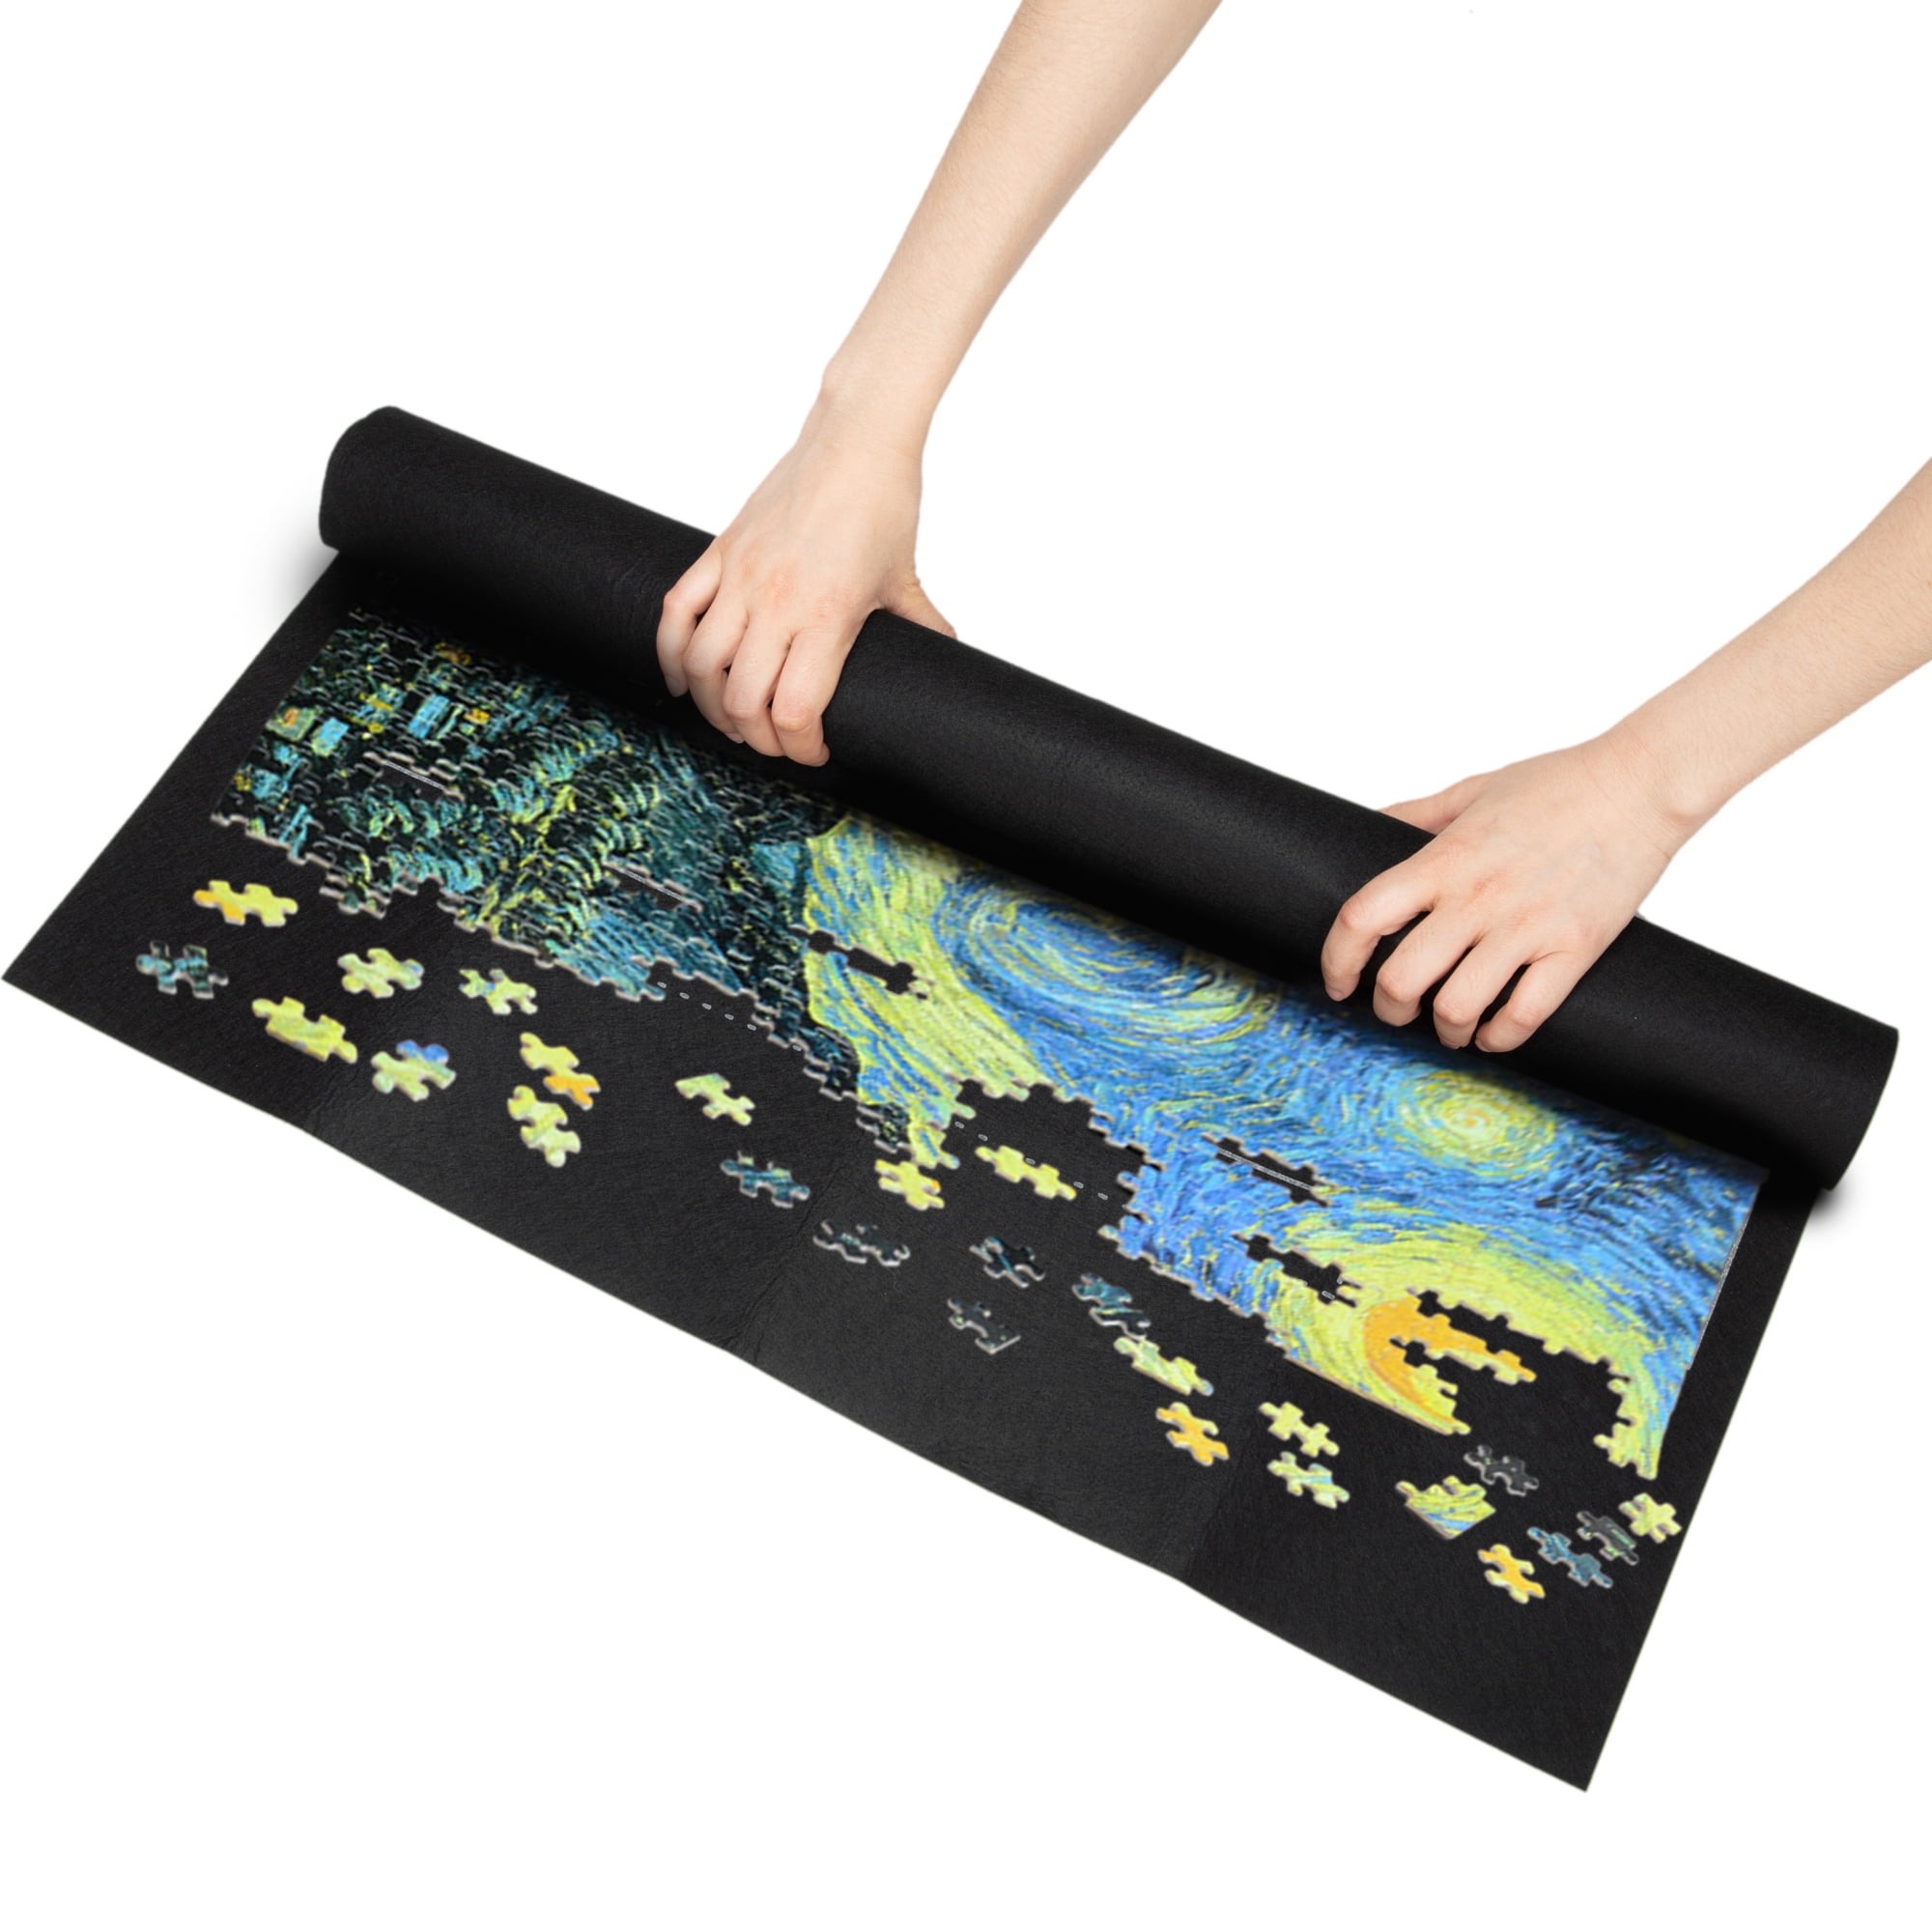 JMF Puzzle Roll Jigsaw Storage Felt Mat Jigroll Up to 1,500 Pieces Puzzles 